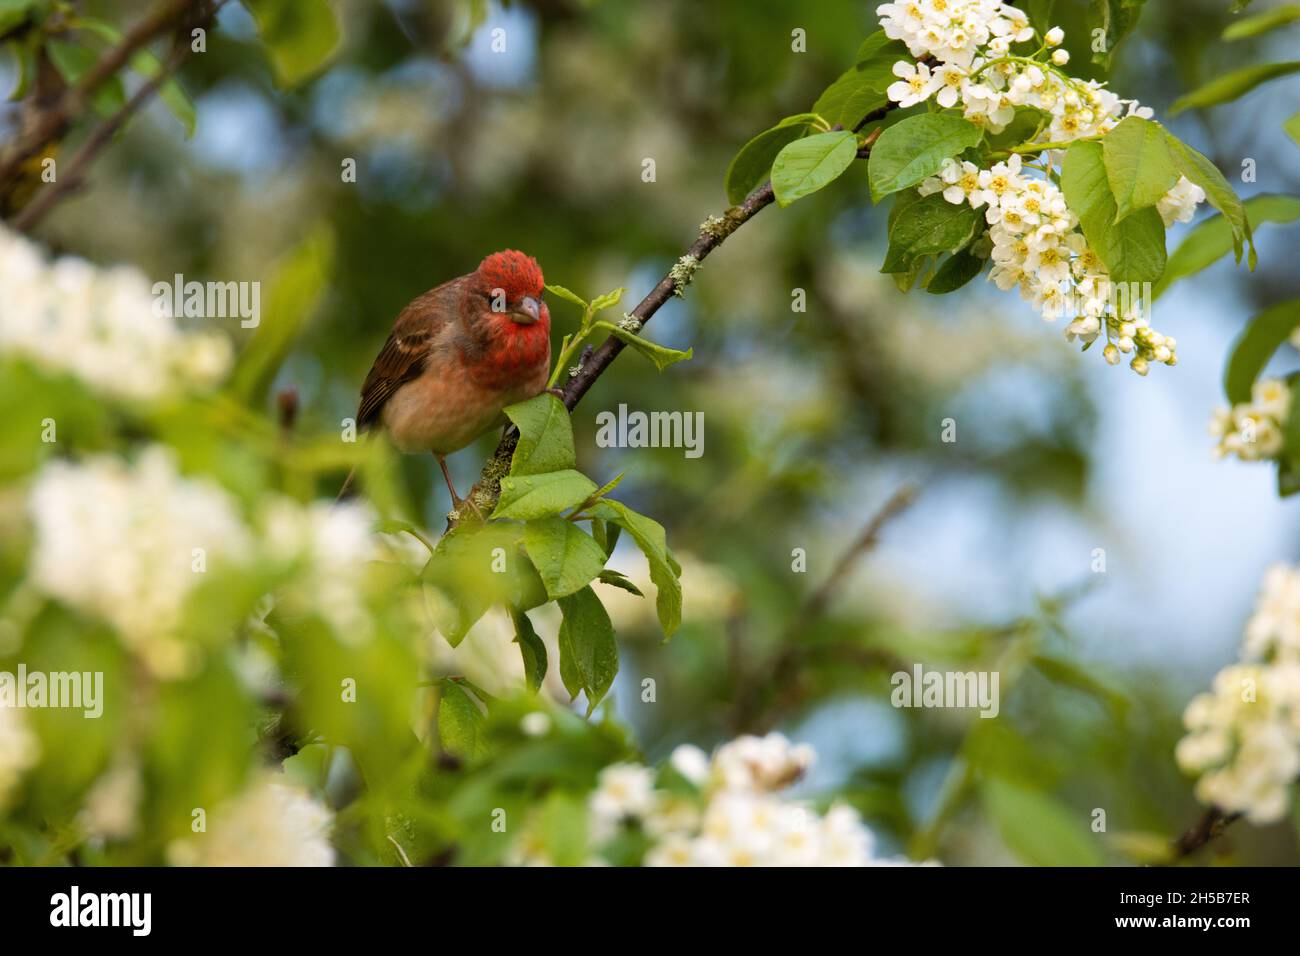 Male Common rosefinch, Carpodacus erythrinus in the middle of Bird cherry blossoms. Stock Photo